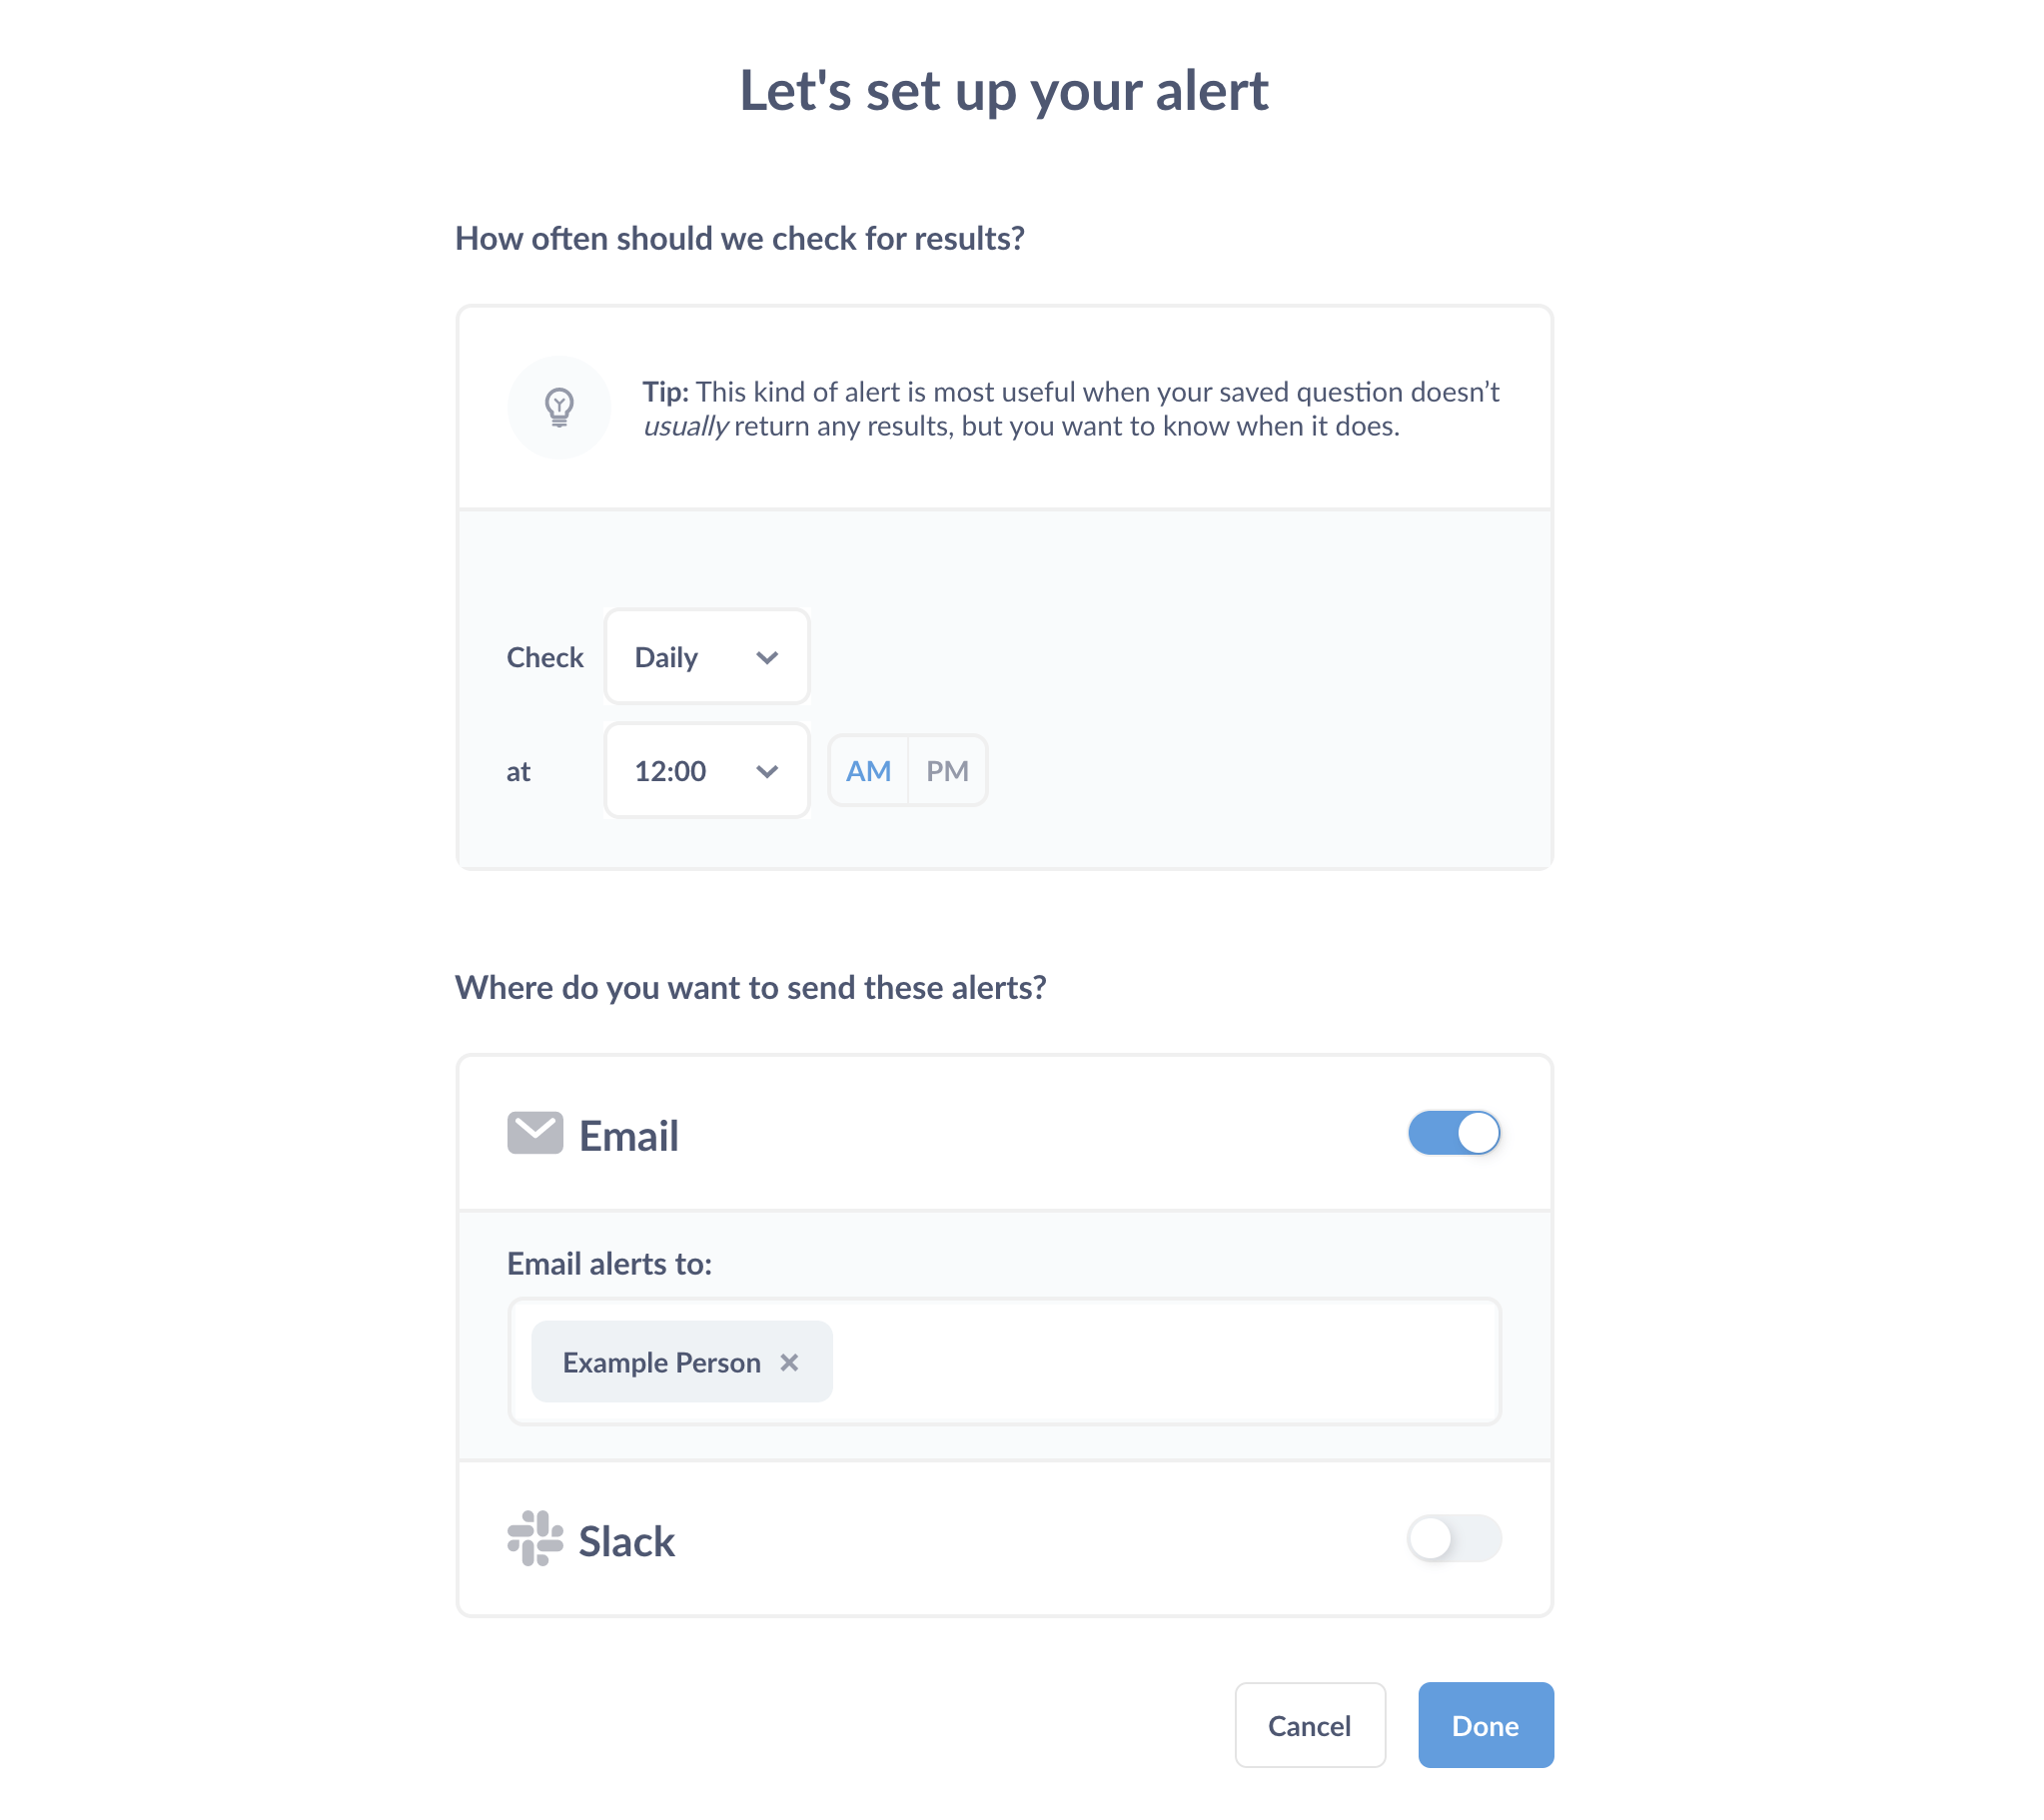 Options for setting up an alert: what time to check for results and whether to send the alerts to Slack or email.